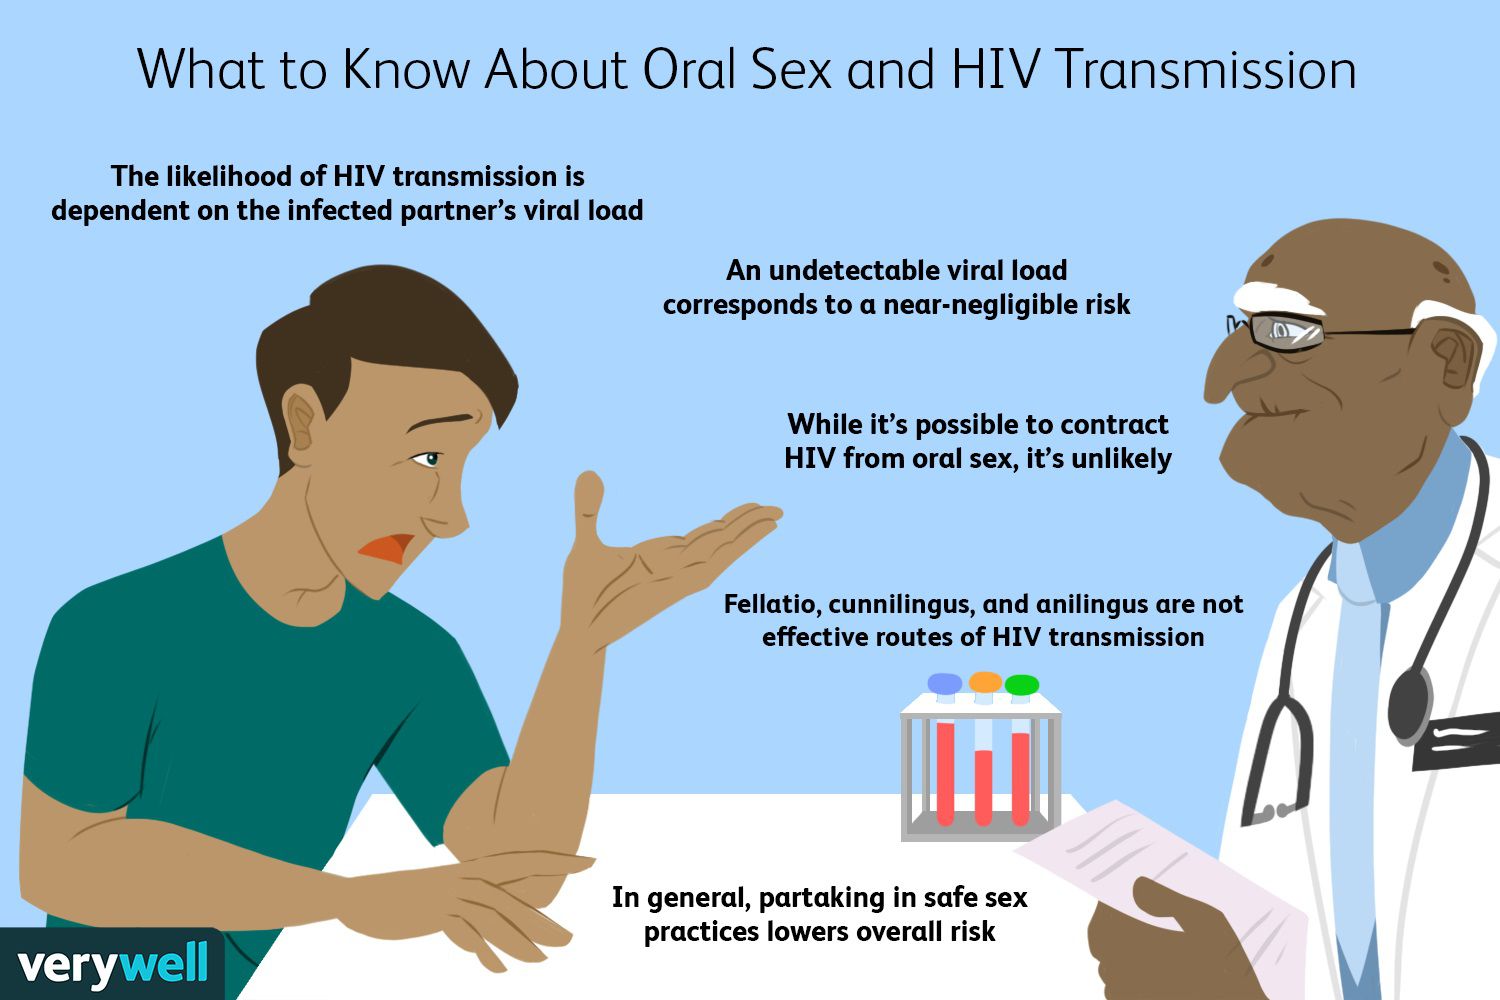 Can I Get HIV from Oral Sex?